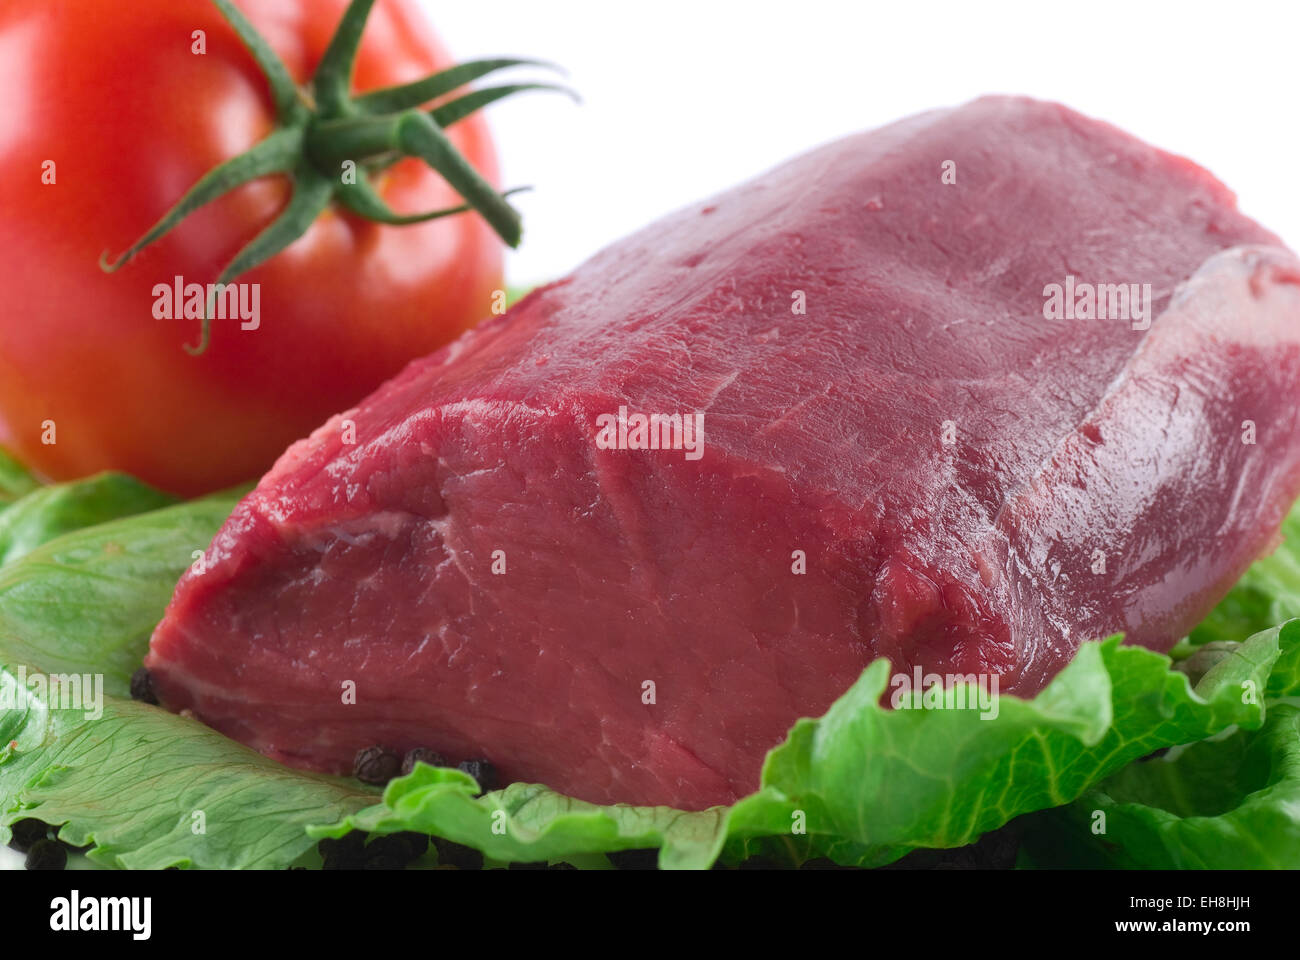 Fillet of beef on a iceberg lettuce leaf. Beef tomato in the background. Stock Photo